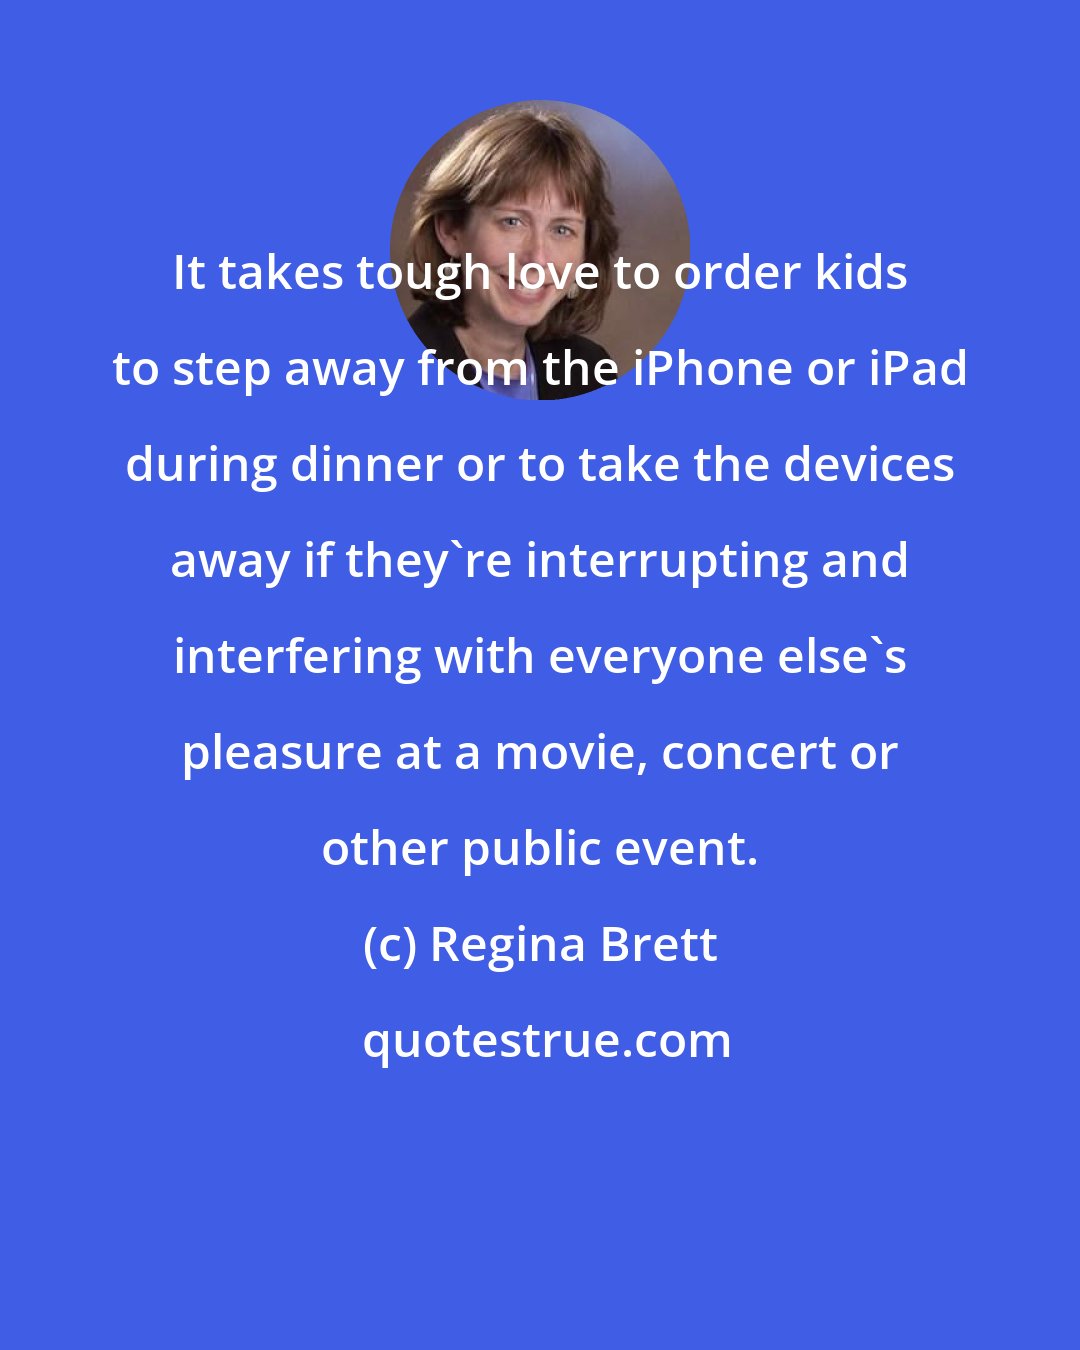 Regina Brett: It takes tough love to order kids to step away from the iPhone or iPad during dinner or to take the devices away if they're interrupting and interfering with everyone else's pleasure at a movie, concert or other public event.